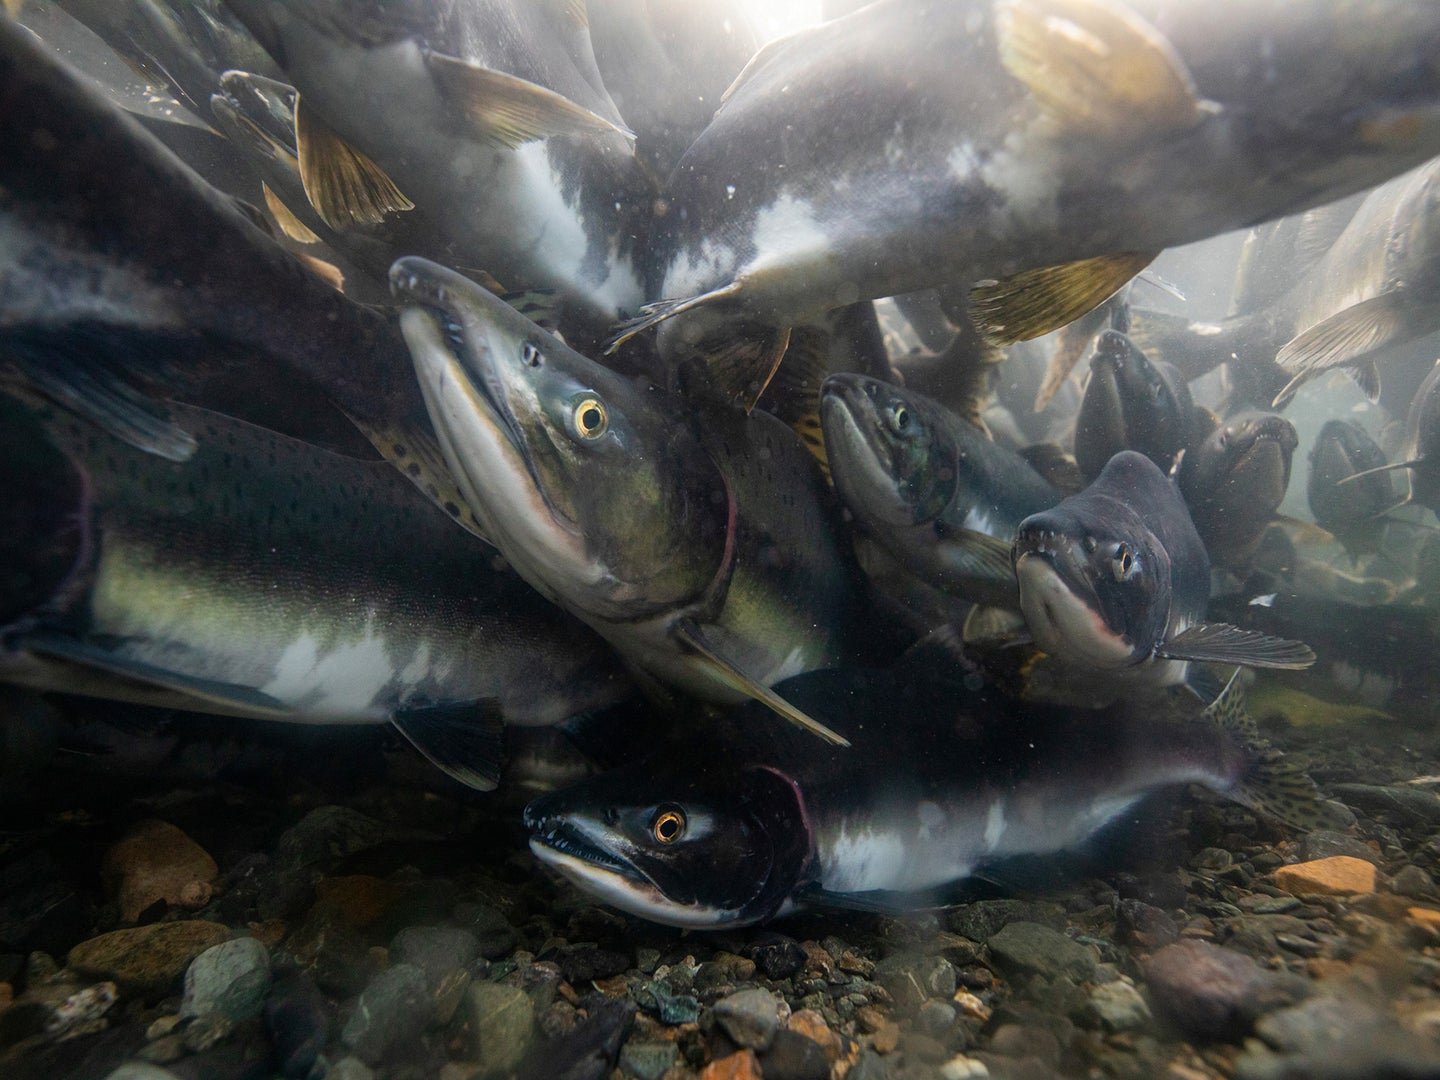 A photo of salmon in the water.